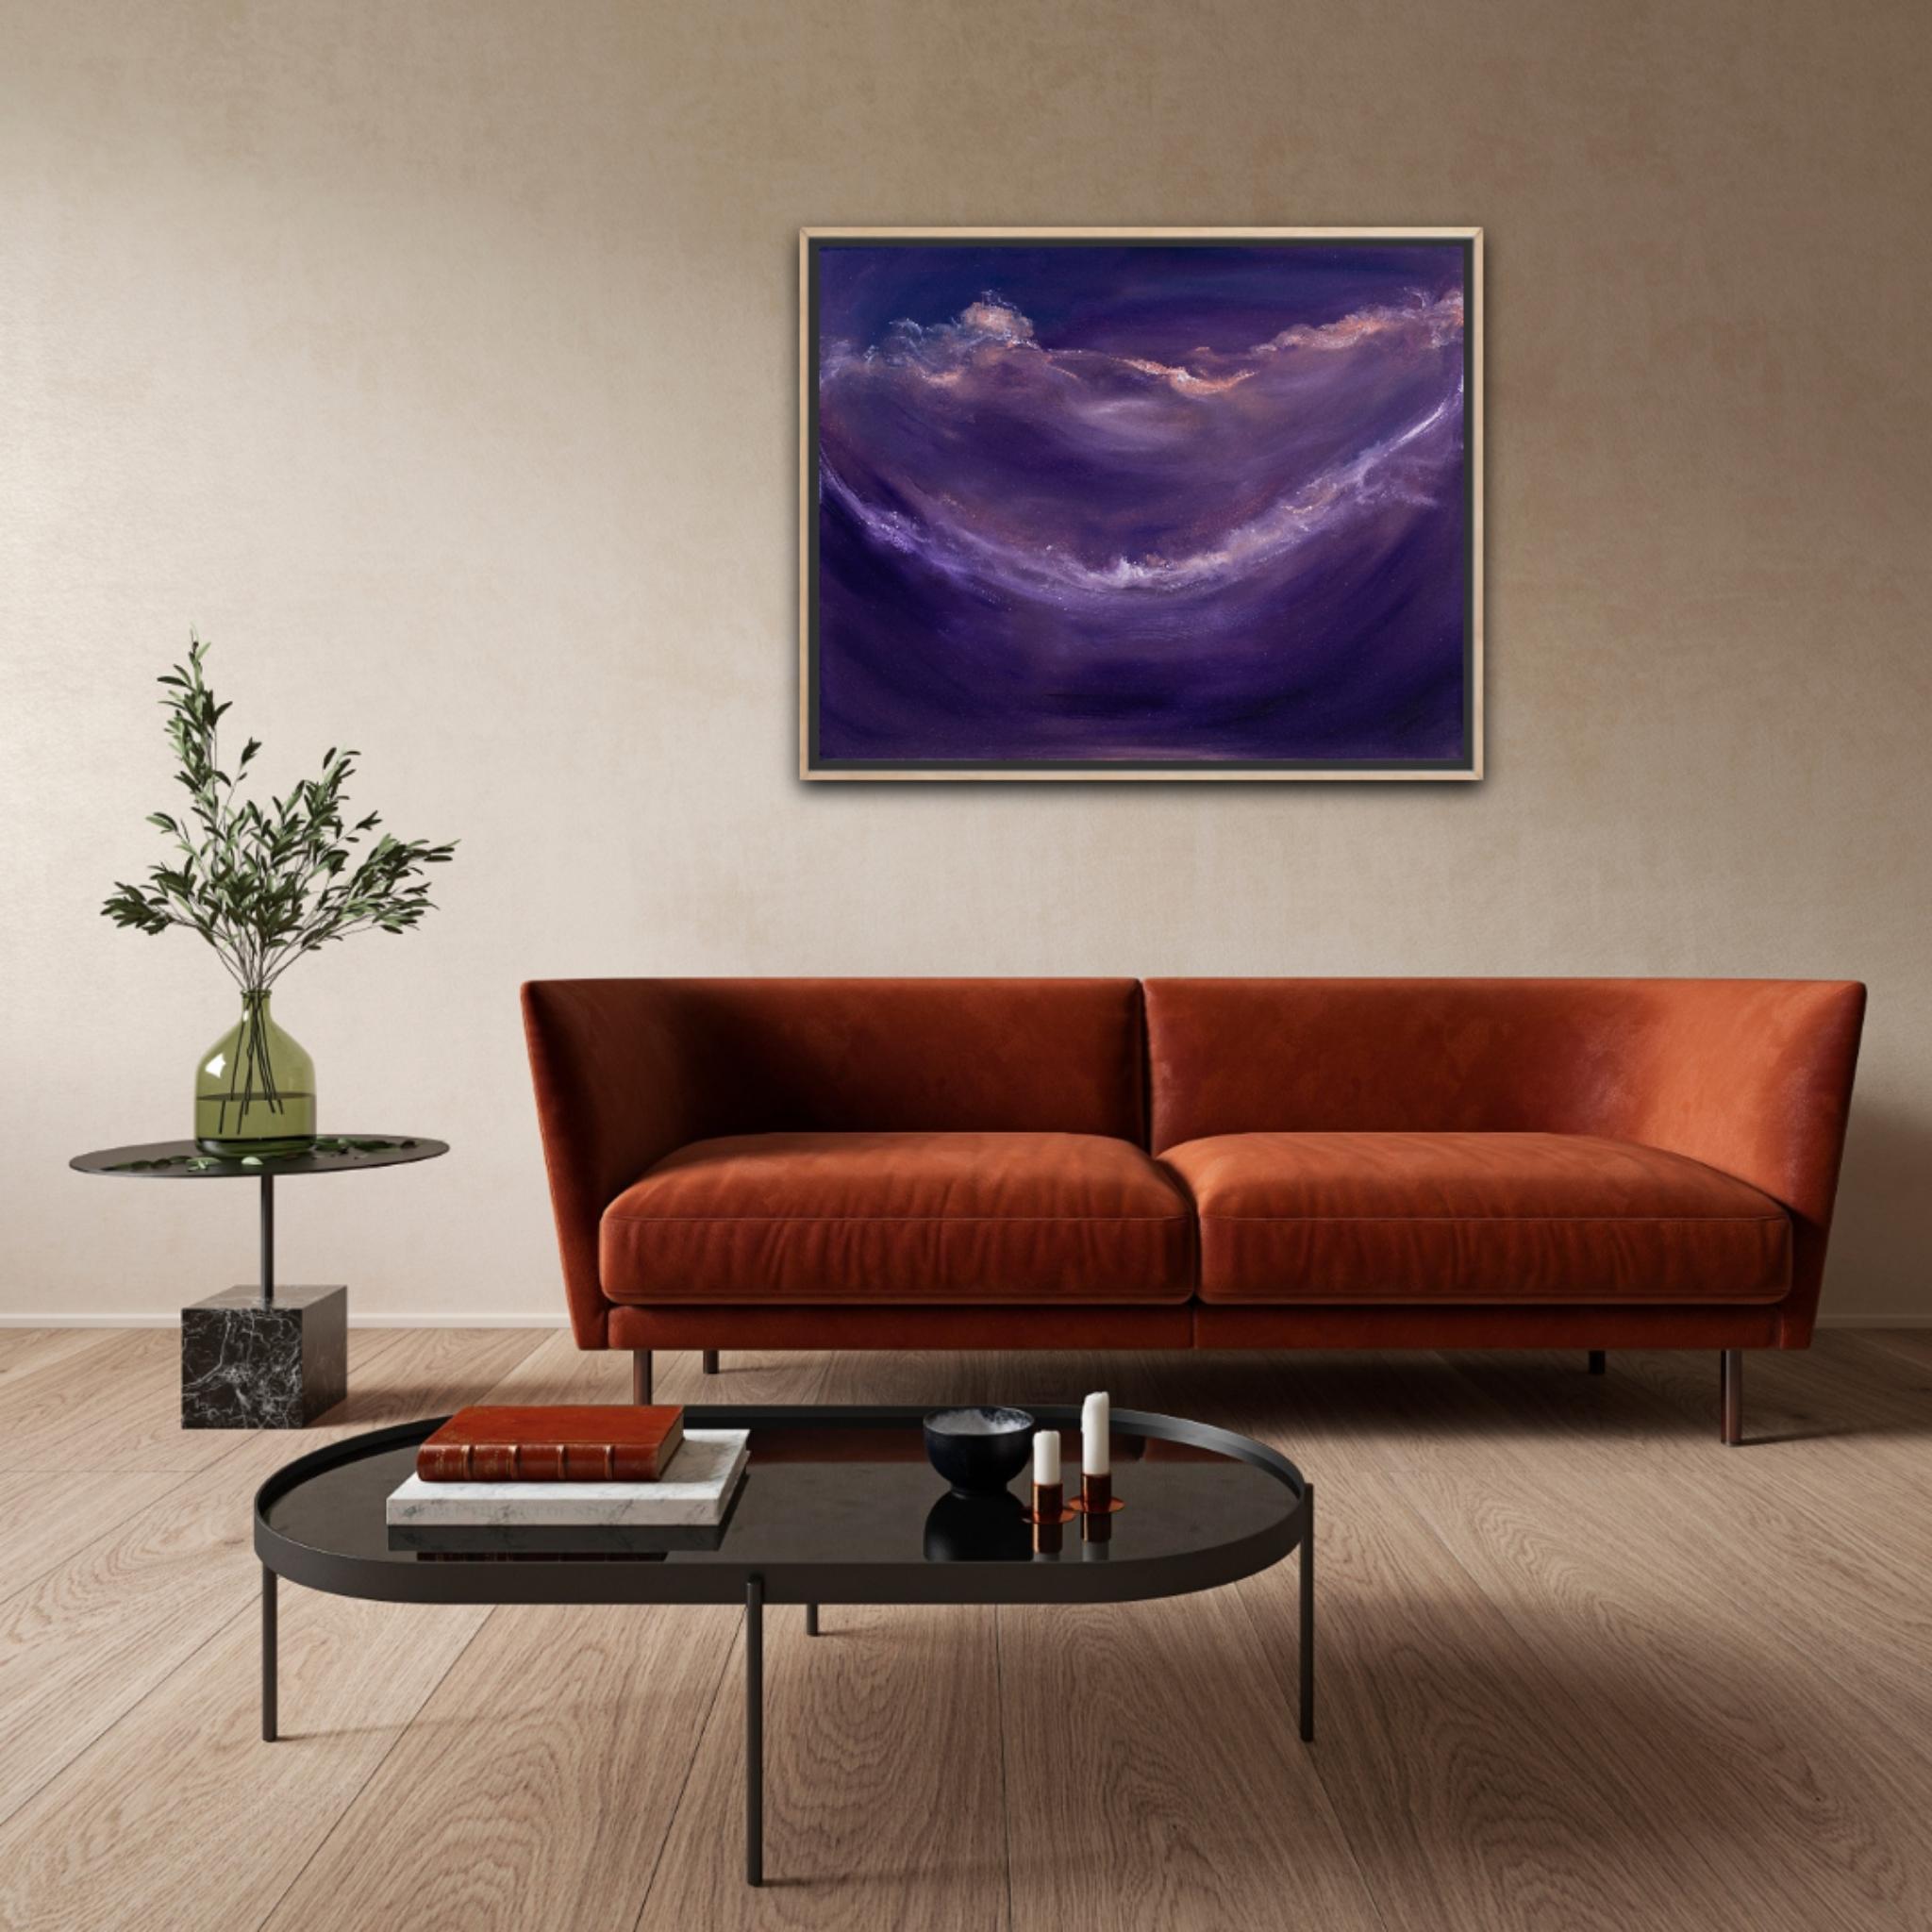 Deep space rhapsody - Abstract purple night sky painting For Sale 8